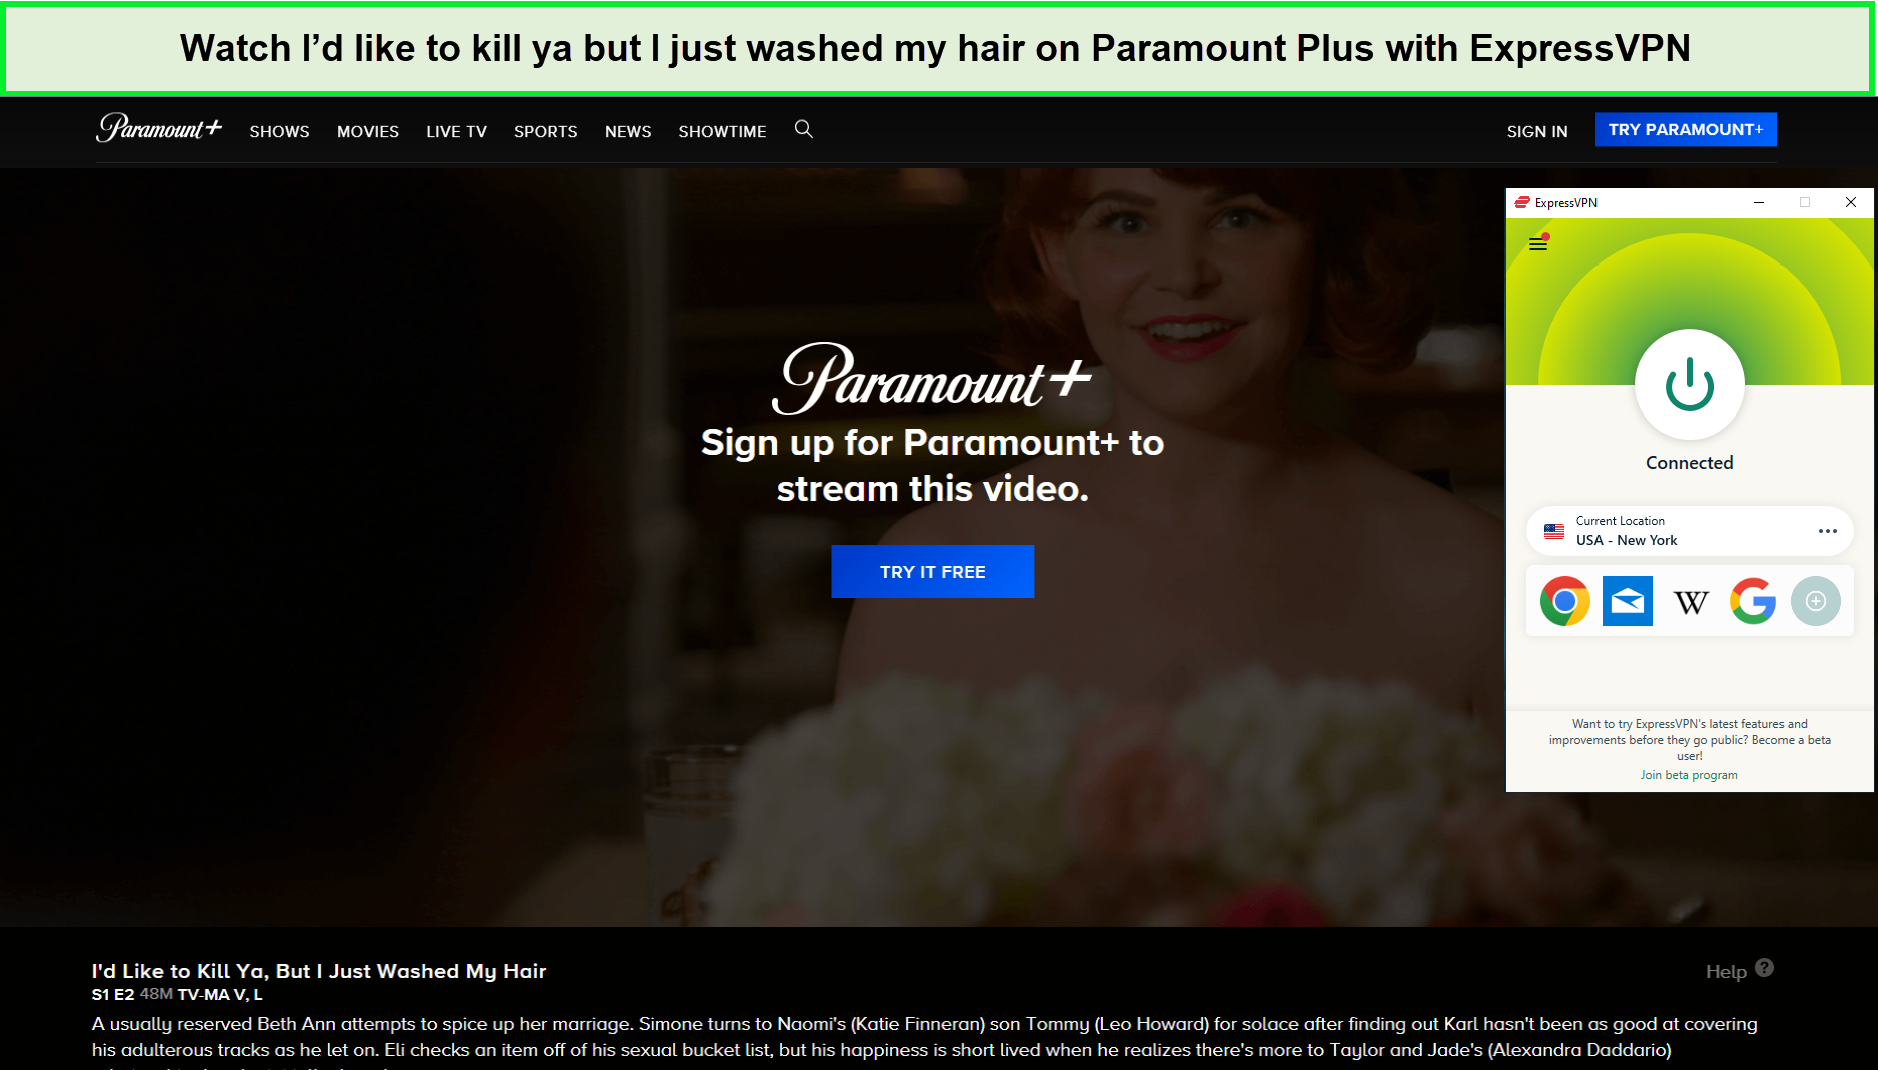 Watch-Id-like-to-kill-ya-but-I-just-washed-my-hair-in-New Zealandon-Paramount-Plus-with-ExpressVPN